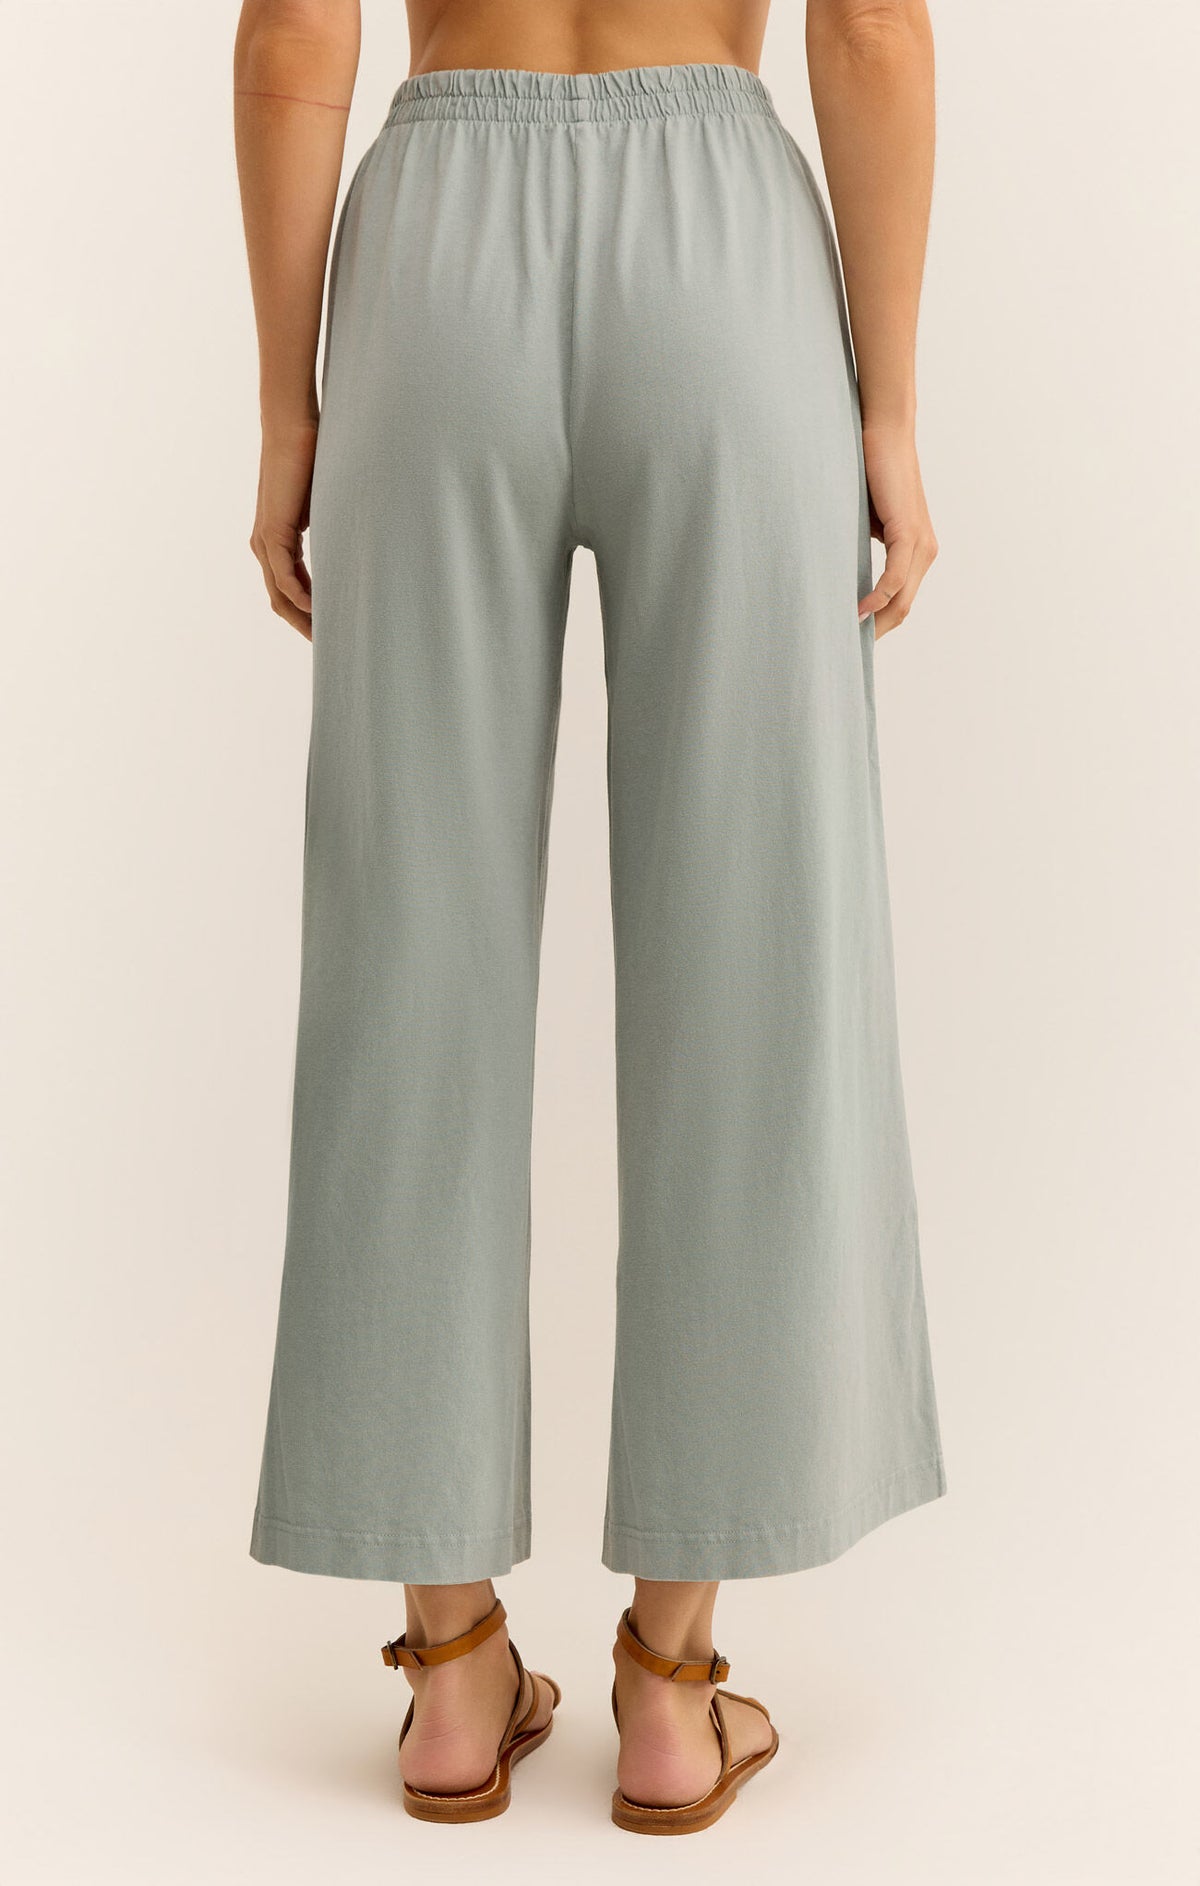 Scout Jersey Flare Pant in Harbor Gray - junglefunkrecordings